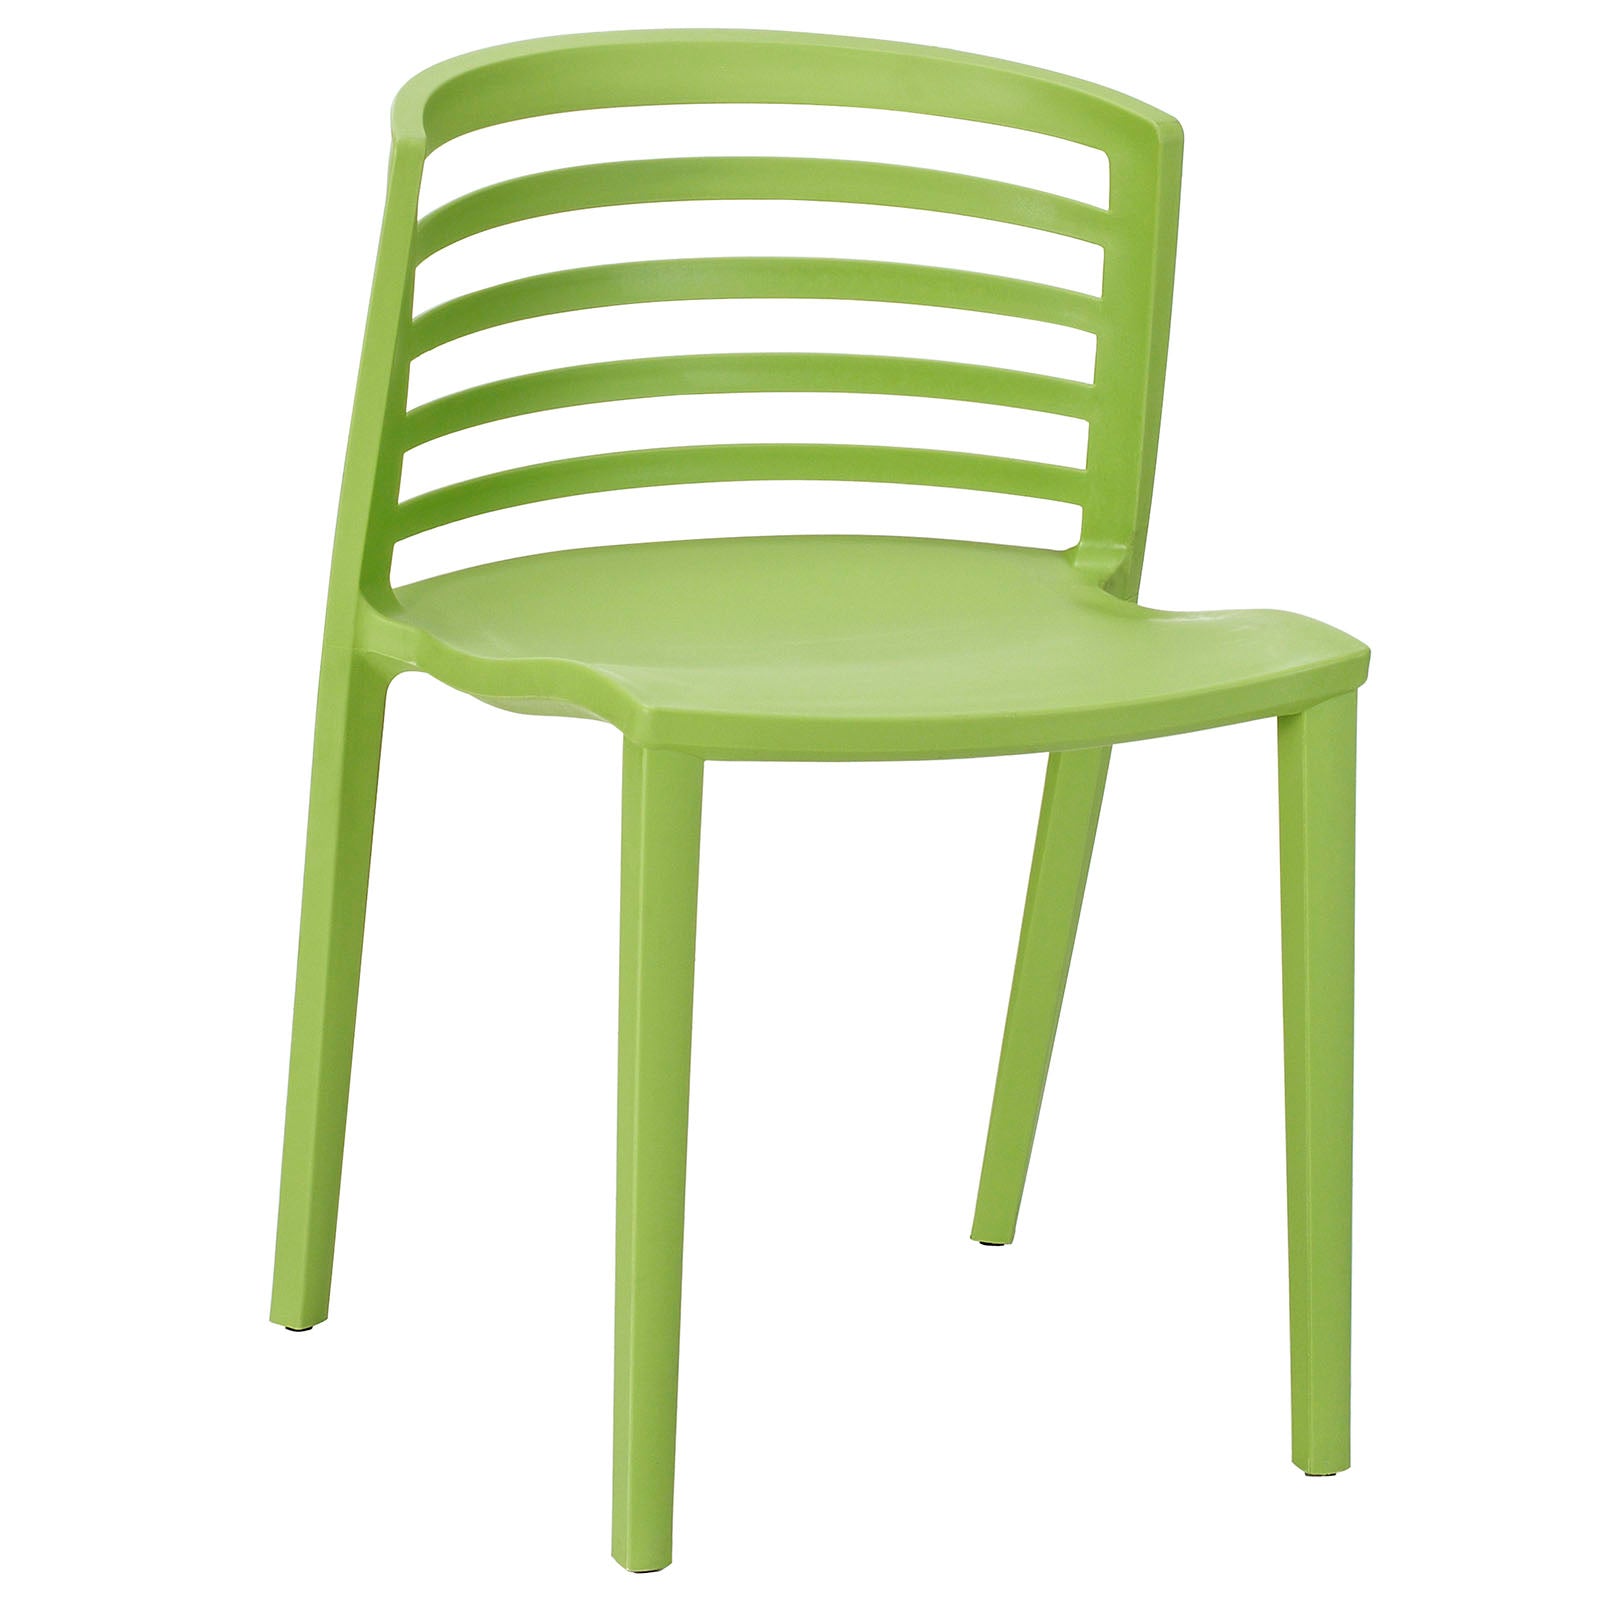 Contemporary Modern Curvy Dining Chair - Multi Functional Dinner Sets